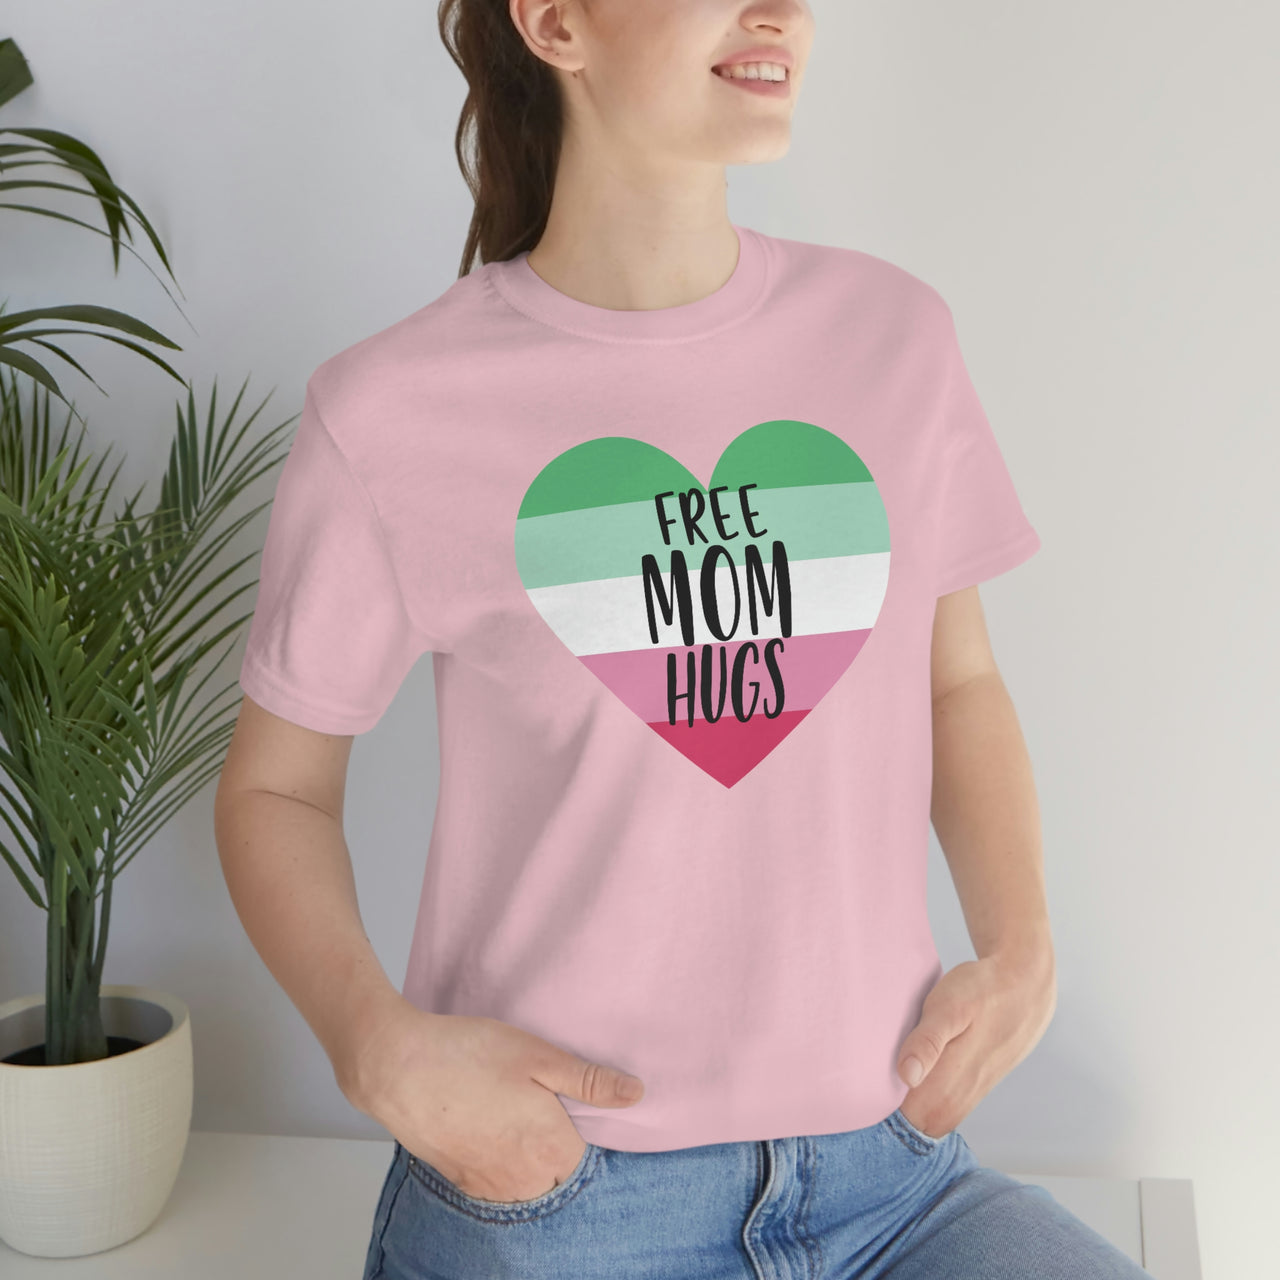 Abrosexual Pride Flag Mother's Day Unisex Short Sleeve Tee - Free Mom Hugs SHAVA CO